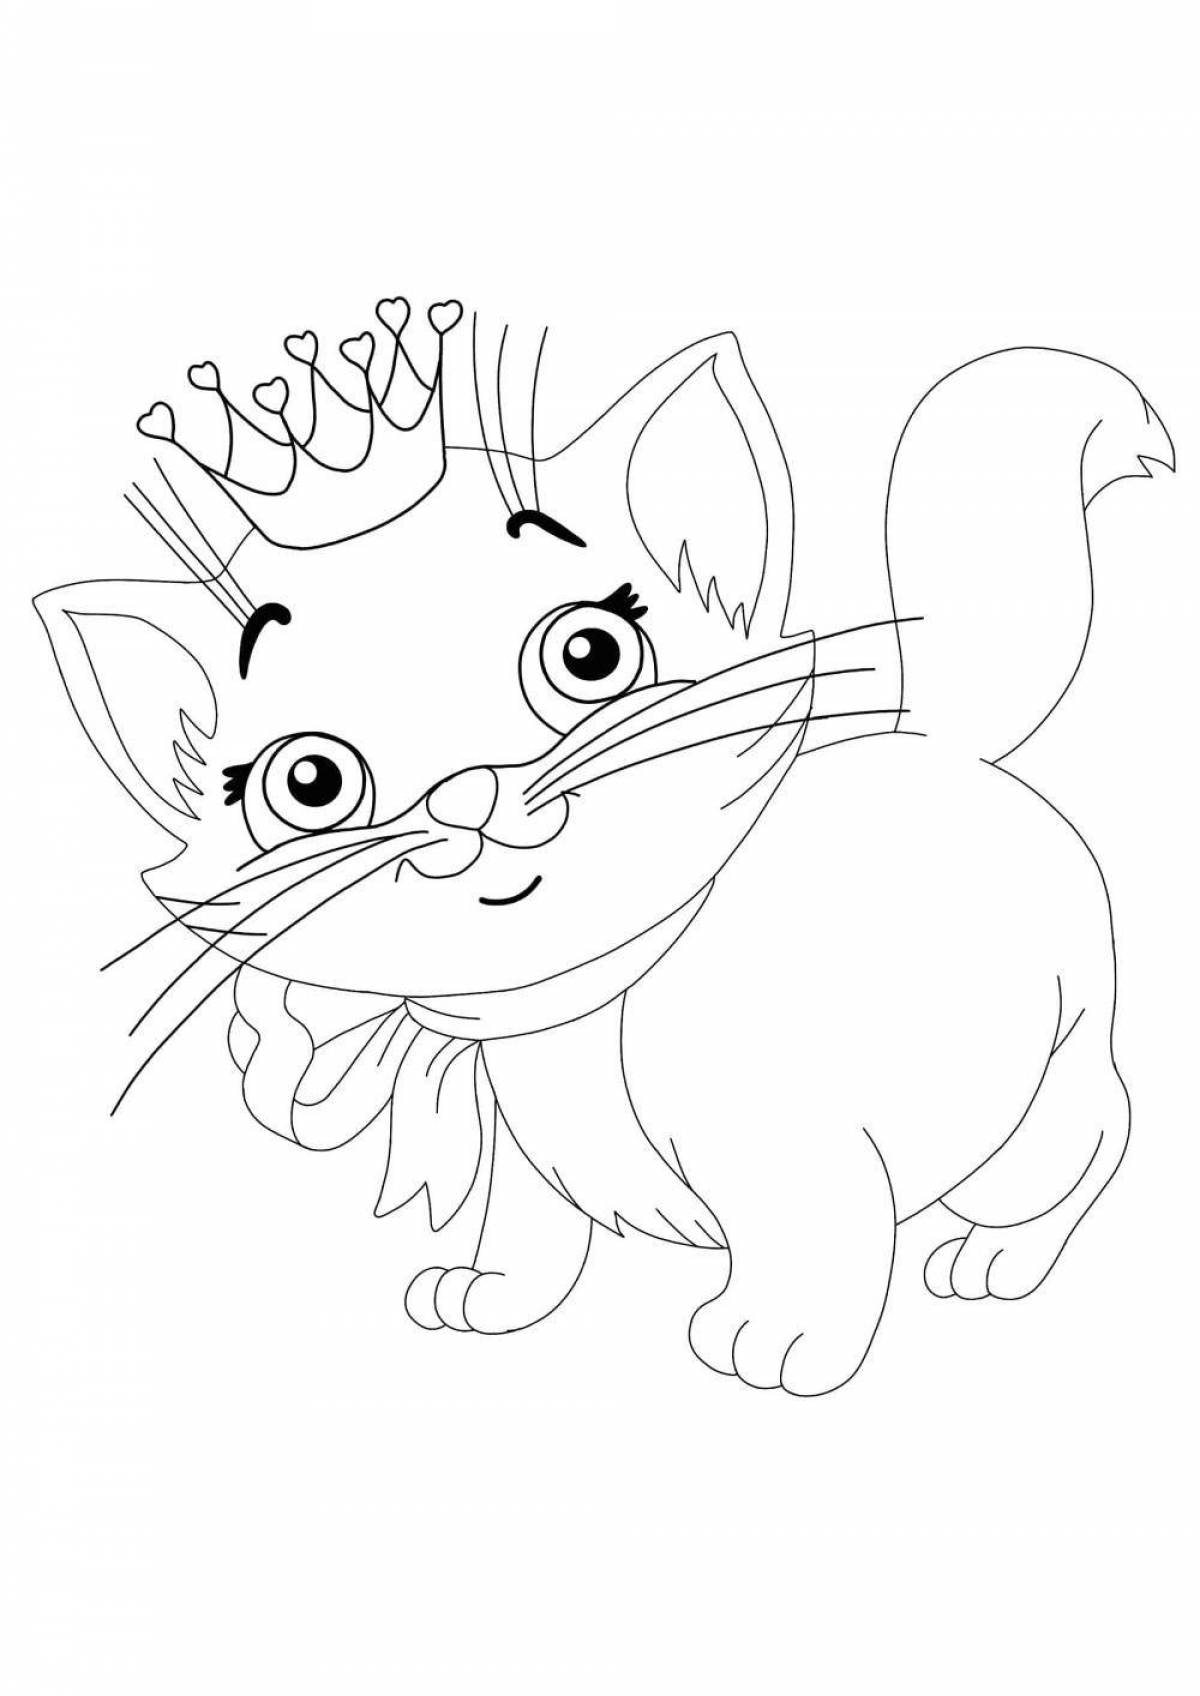 Coloring page nice cat with a crown